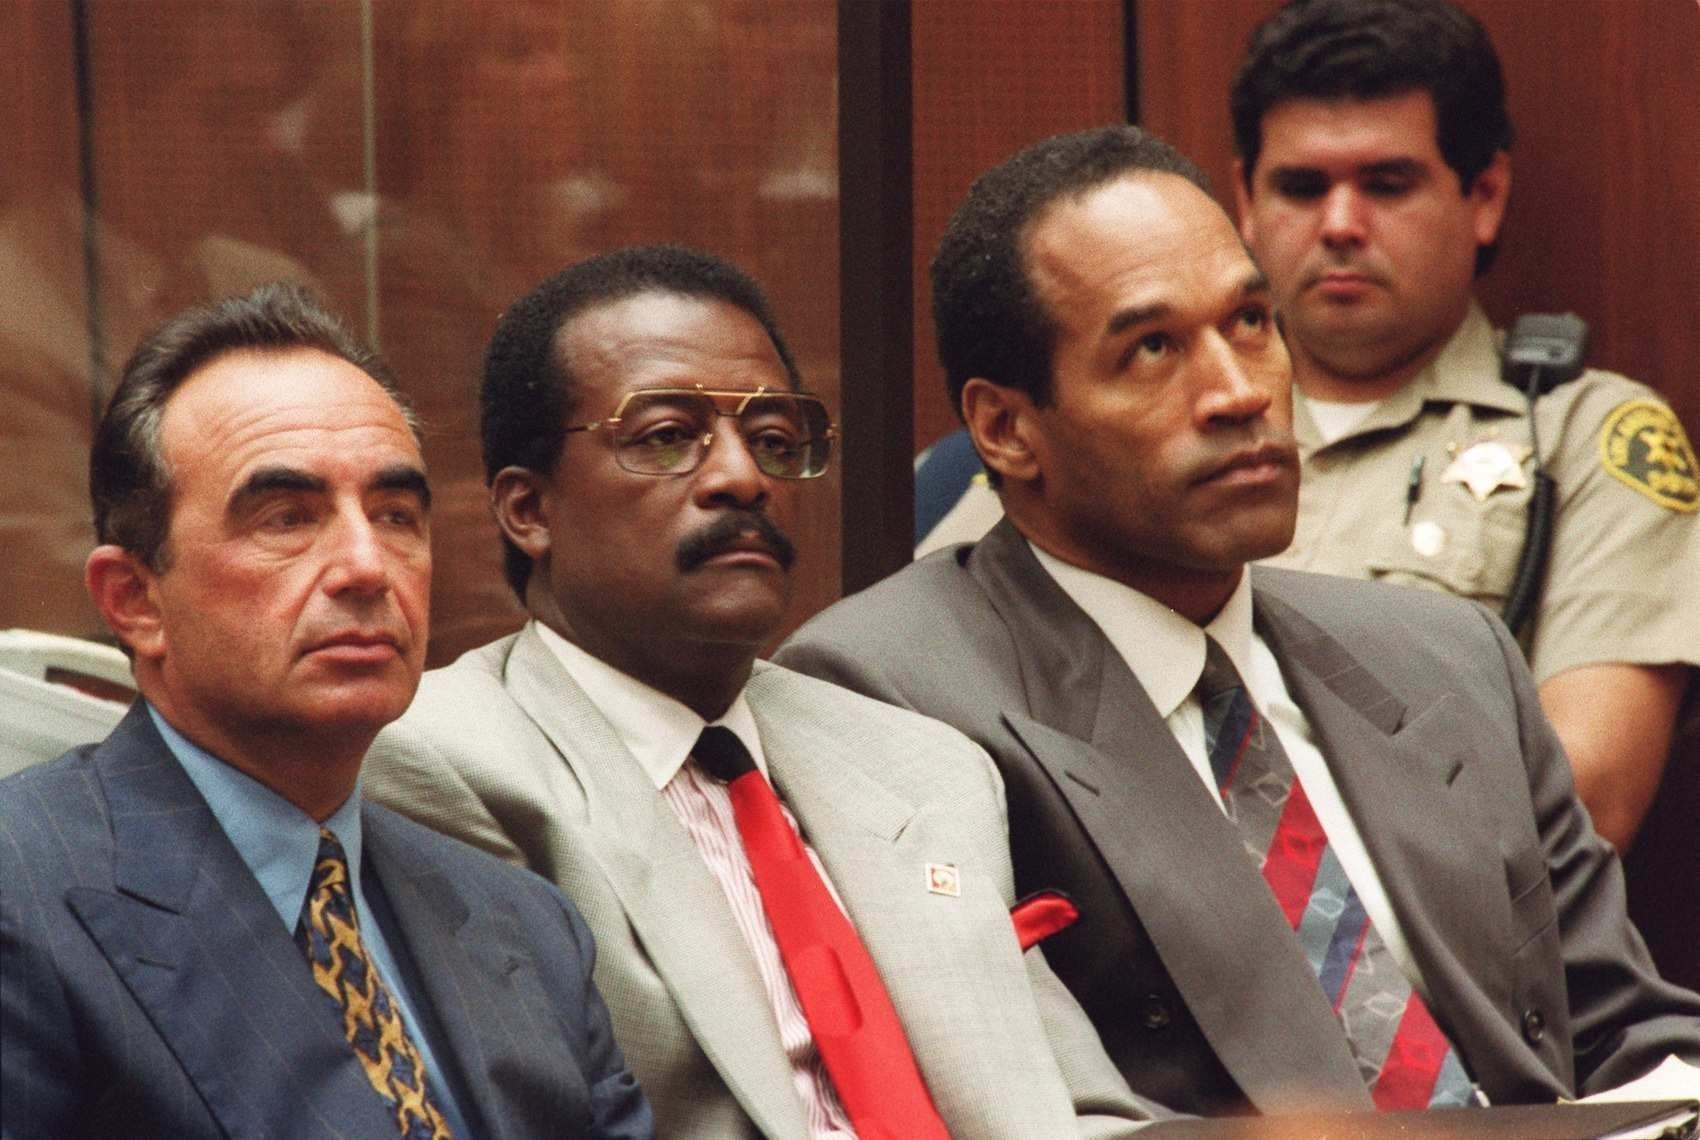 Revisiting the O.J. Simpson trial, 20 years after the 